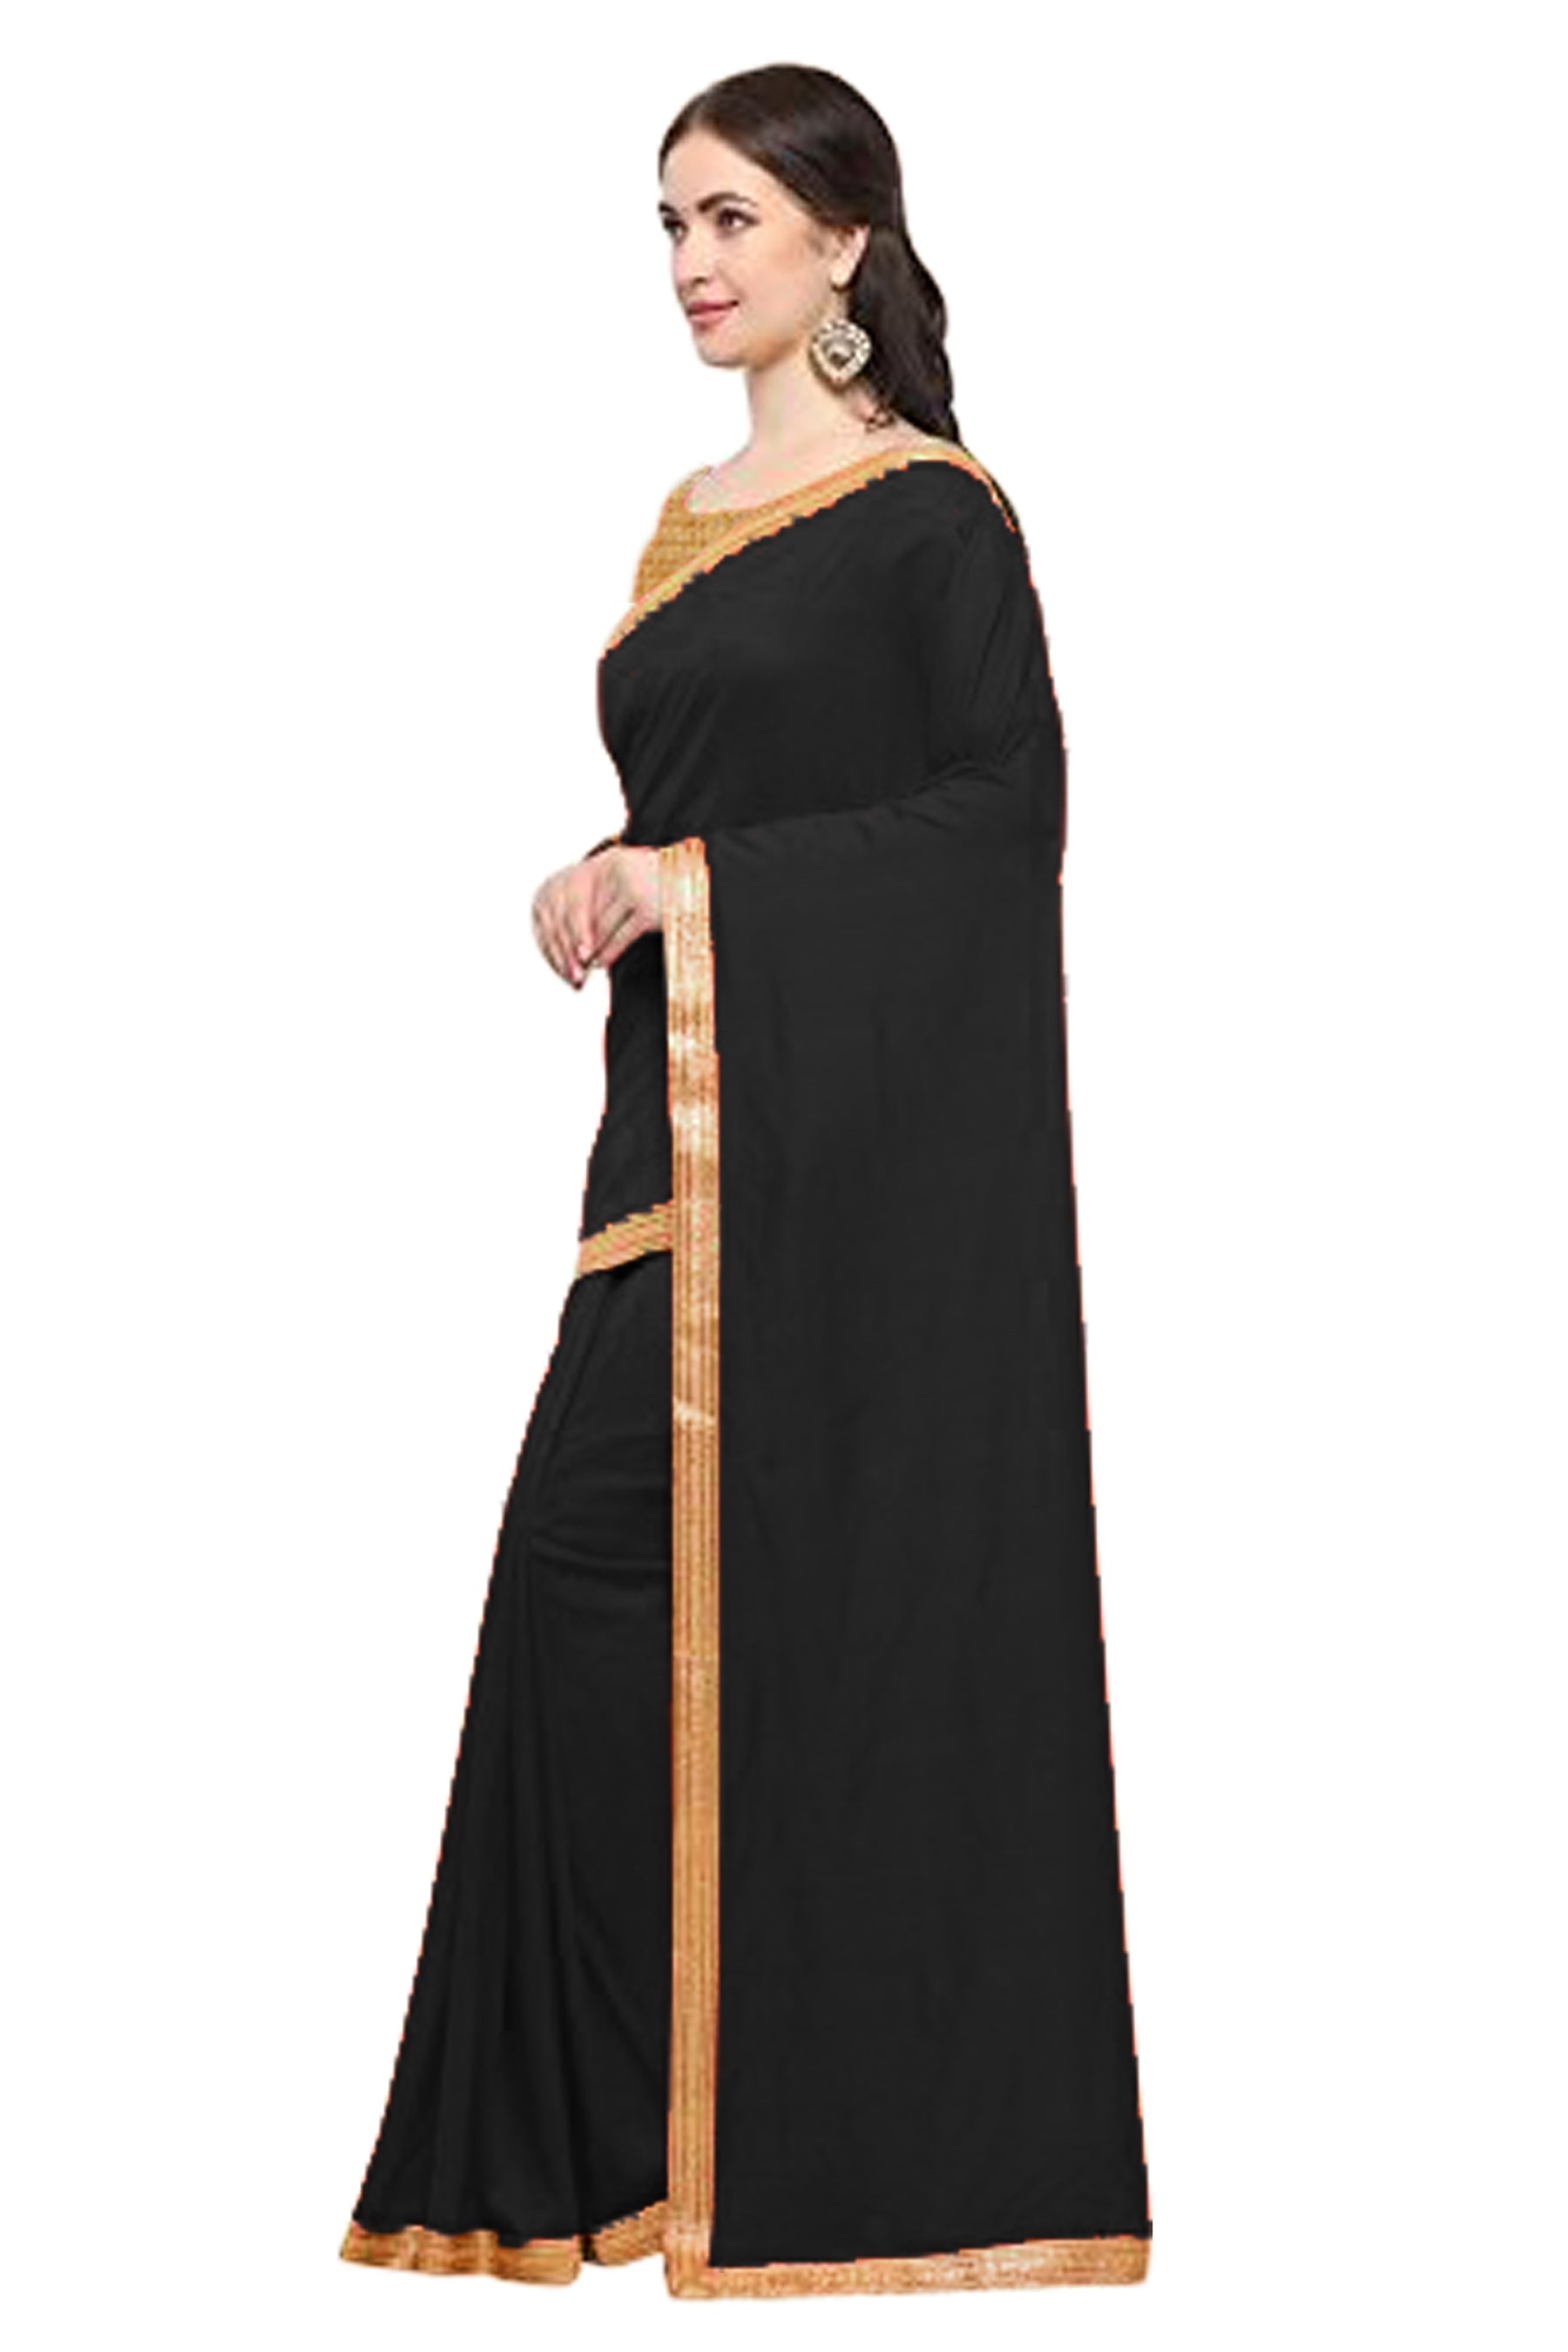 Women's self Woven Solid Occasion Wear Georgette Heavy Border Sari With Blouse Piece (Black) - NIMIDHYA